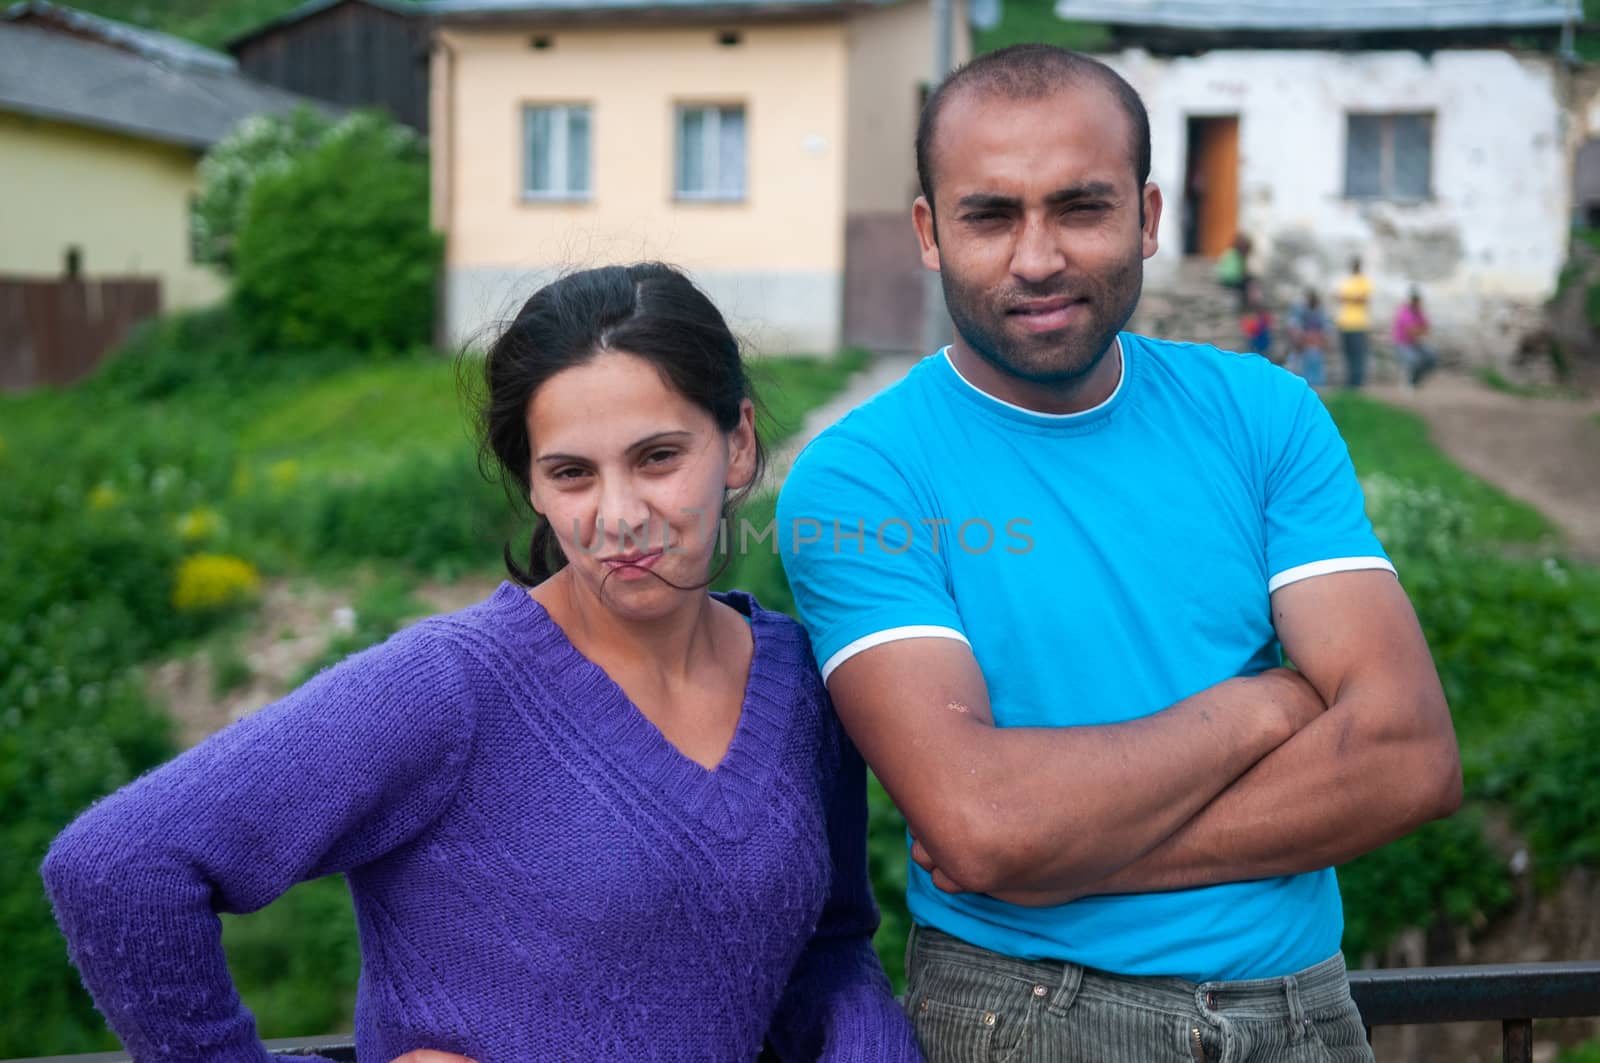 5/16/2018. Lomnicka, Slovakia. Roma or Gypsy community in the heart of Slovakia, living in horrible conditions. They suffer for poverty, stigma and luck of equal opportunities. Desolation, discrimination and misery.